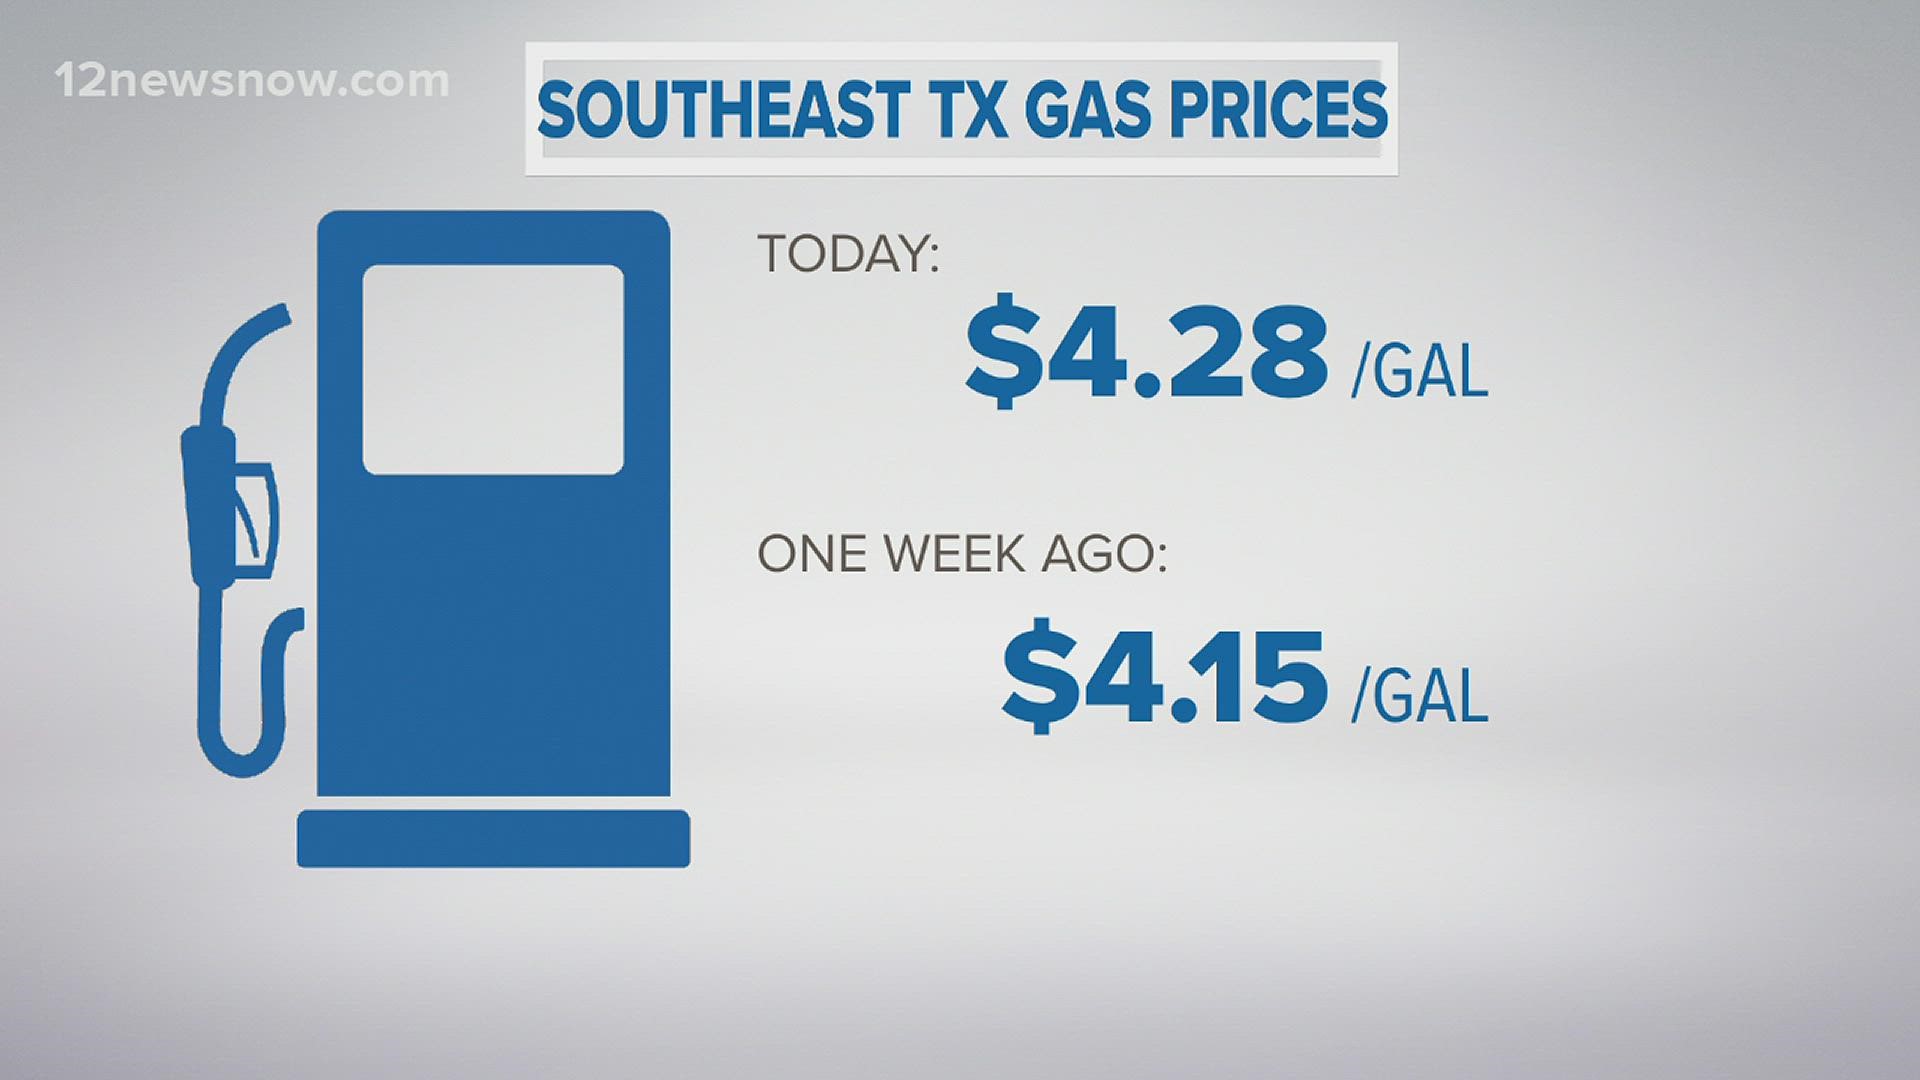 On Friday, we broke the record for gas prices.